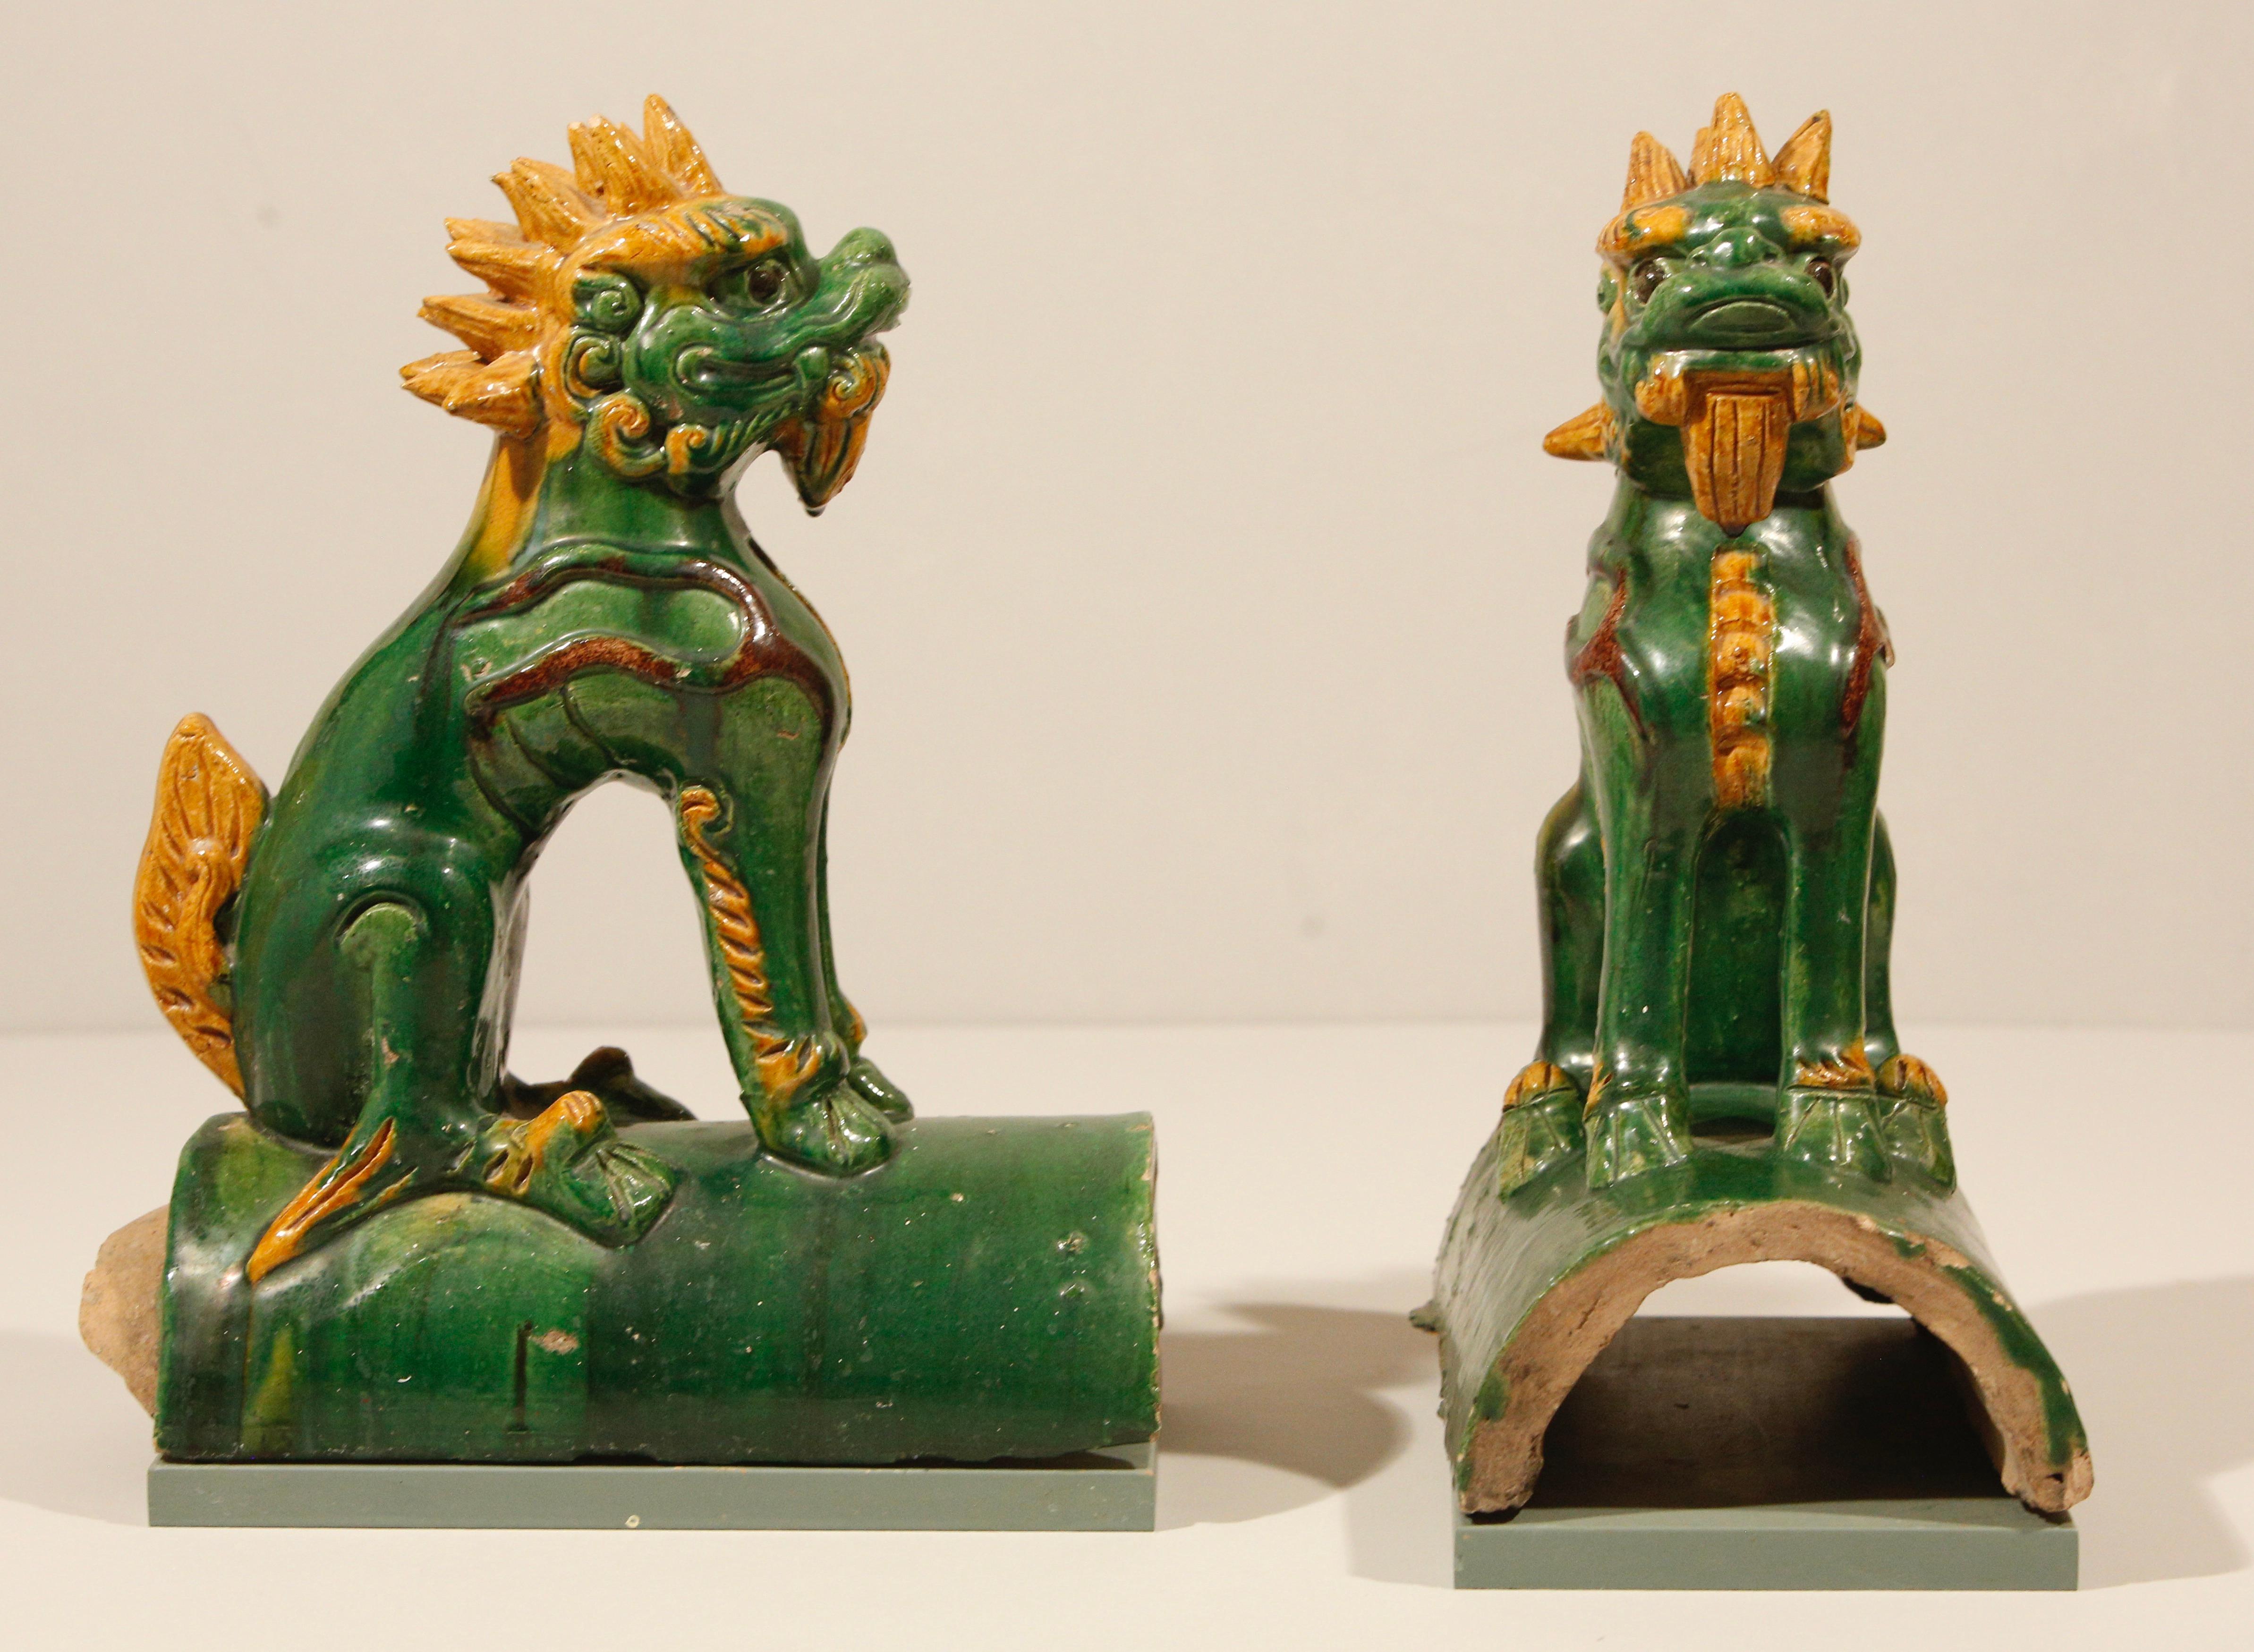 Foo Dogs Chinese sancai architectural roof tiles in green and mustard / orange shades.

Antique Chinese lion guardians (also known as 